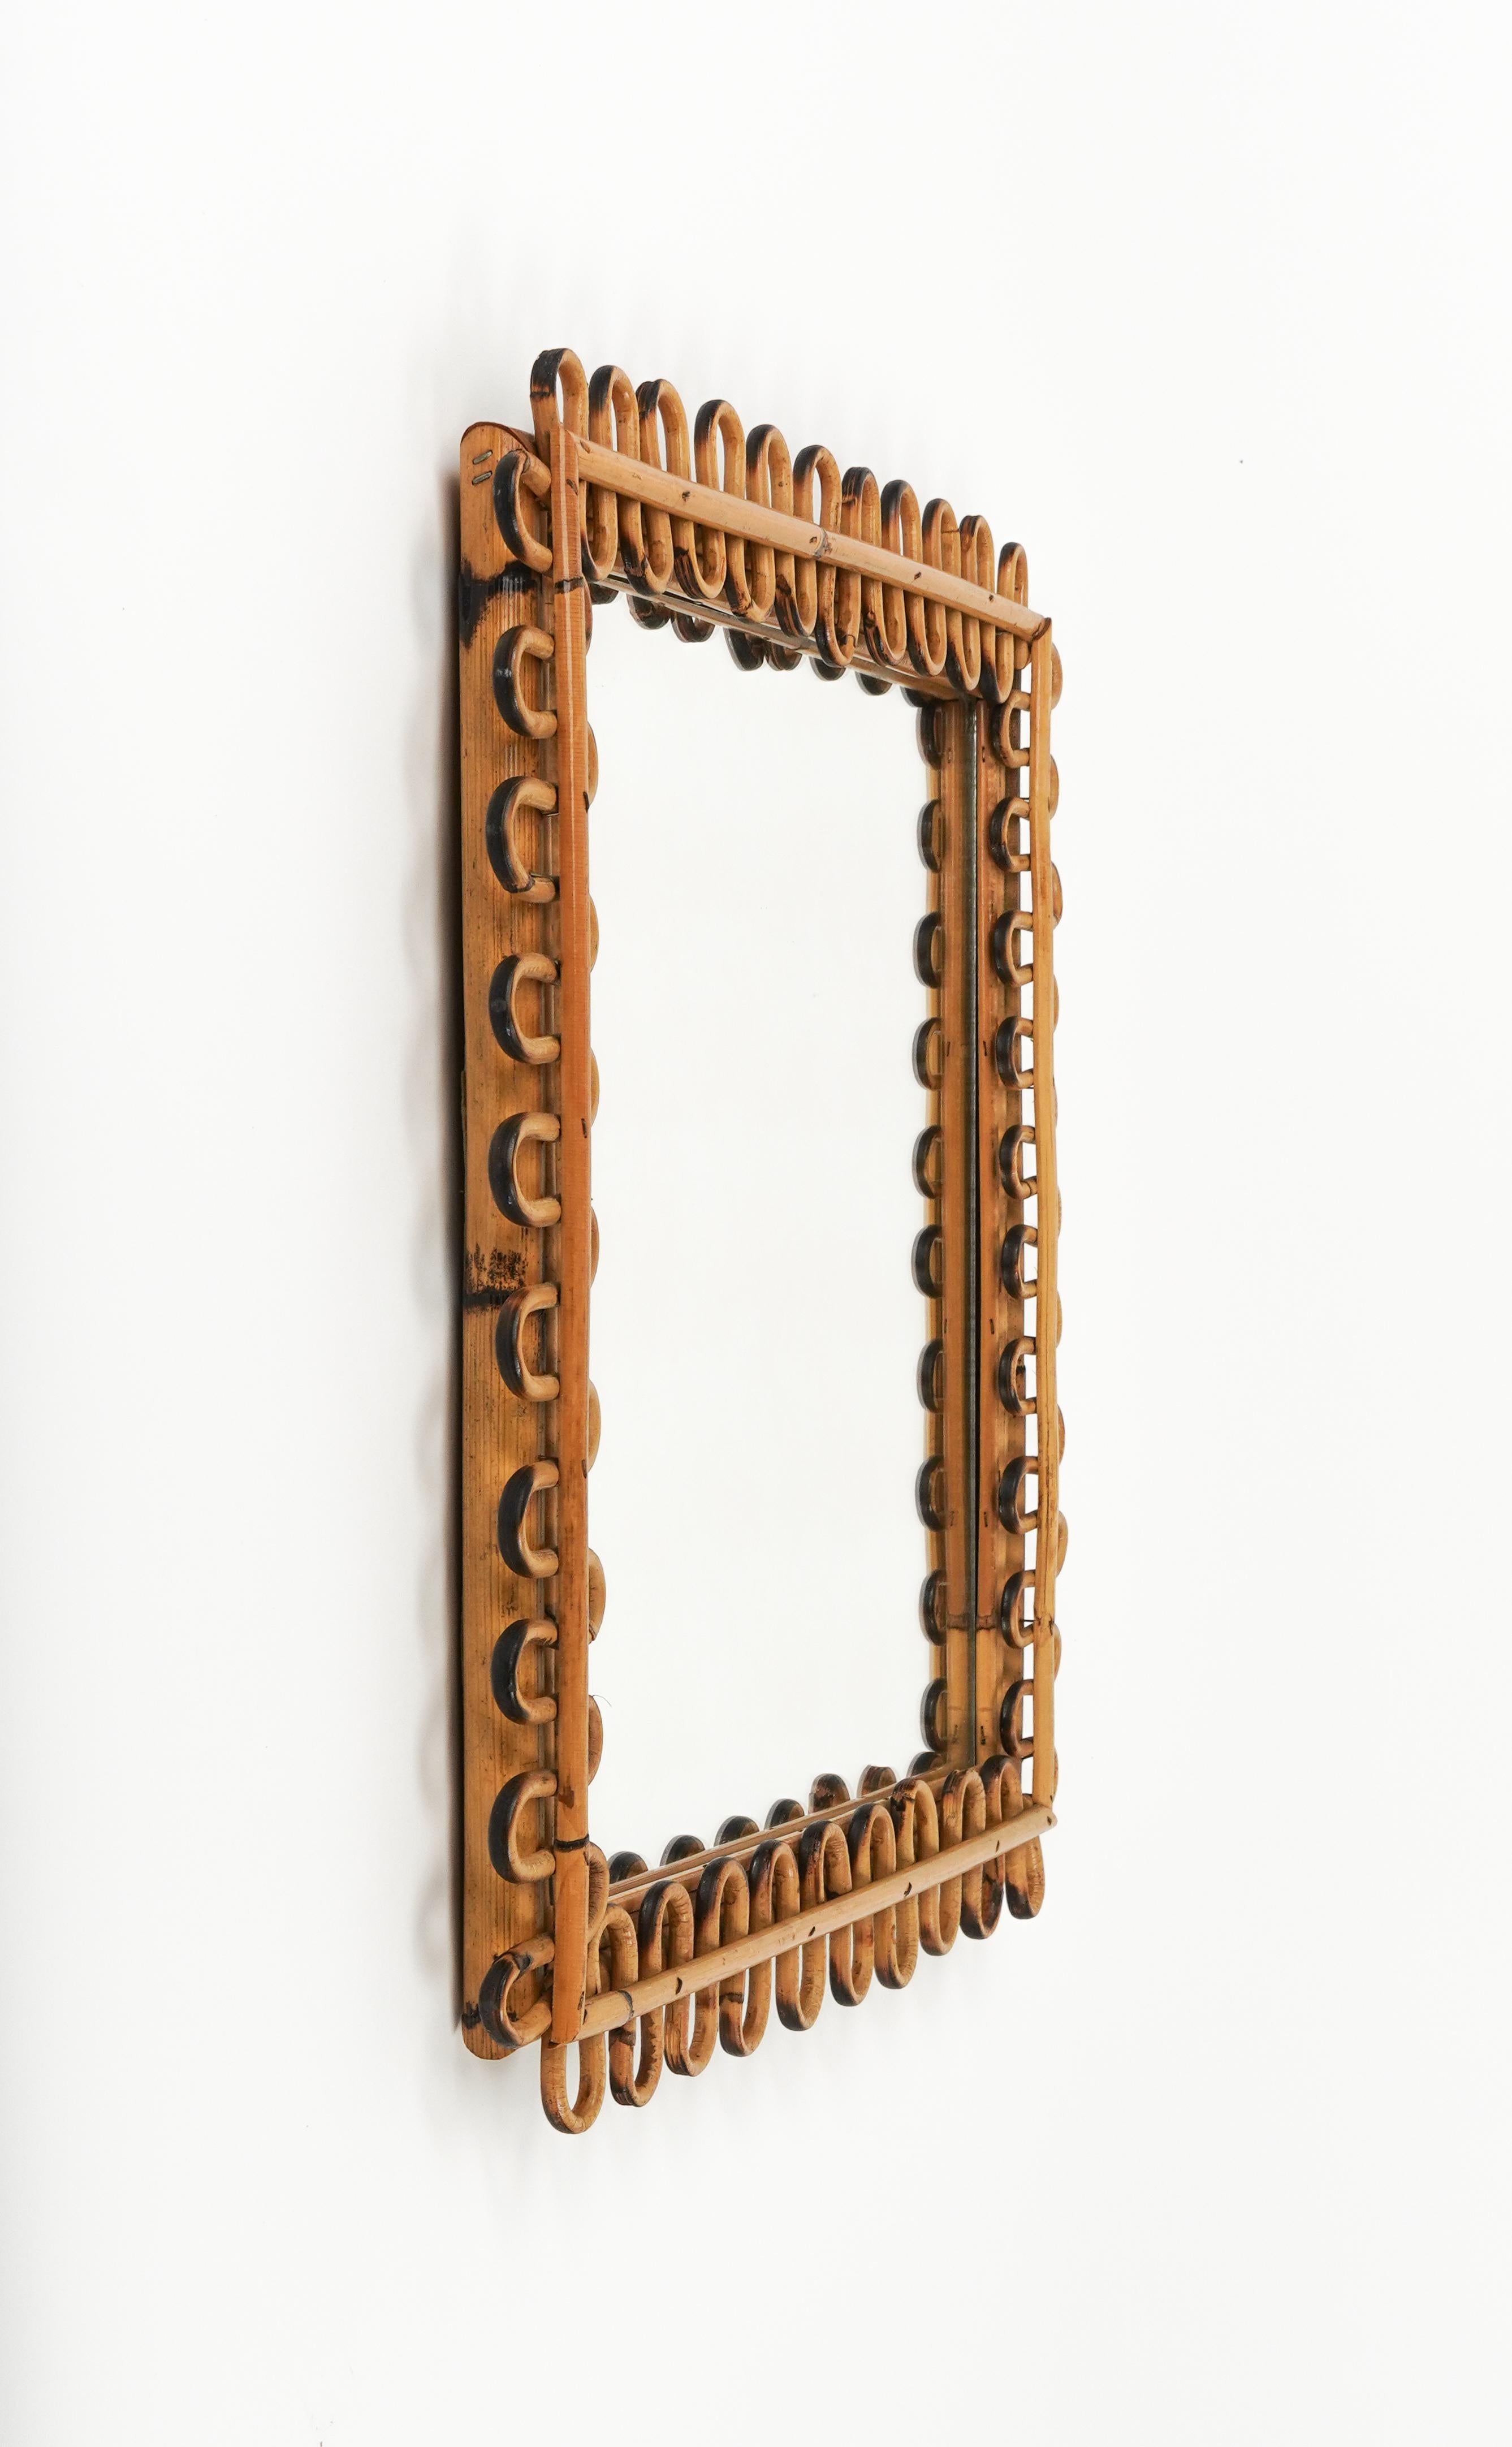 Italian Midcentury Rattan & Bamboo Squared Wall Mirror Franco Albini Style, Italy 1960s For Sale